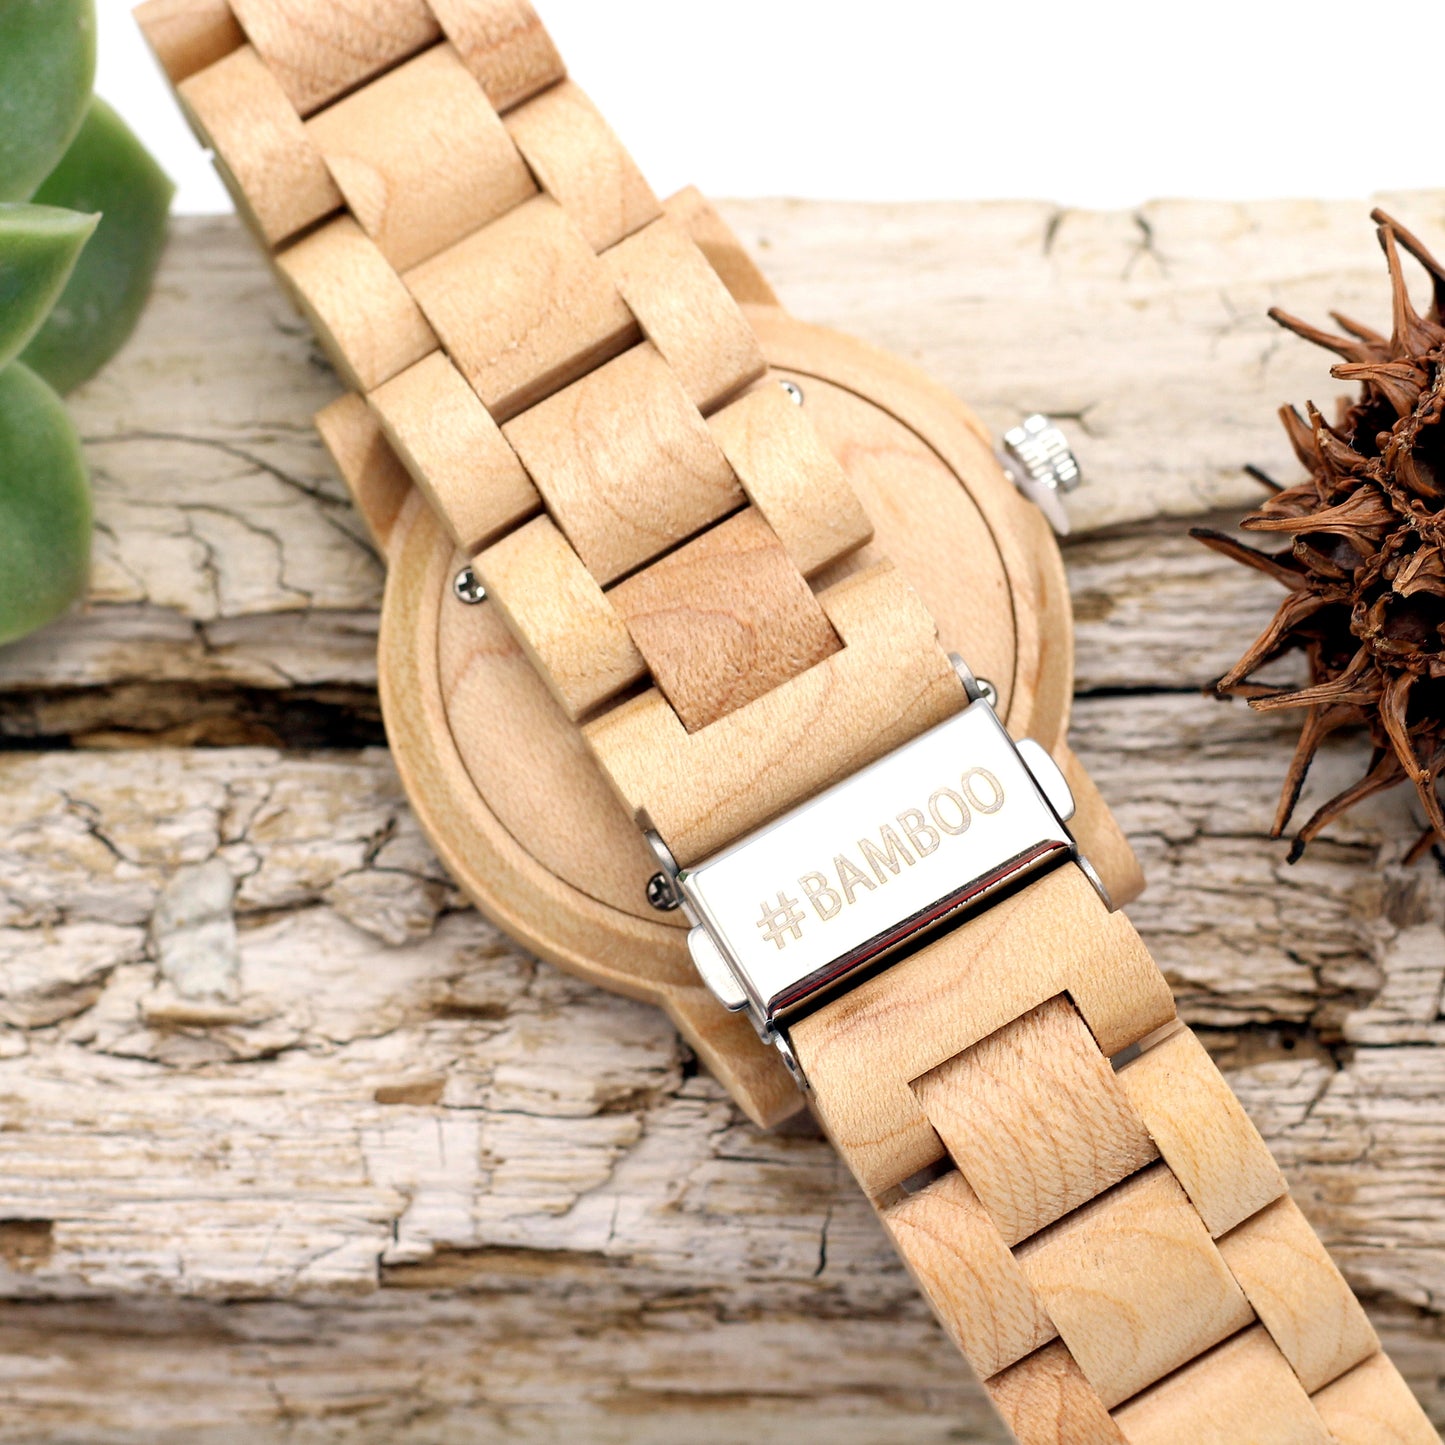 SLICK LIGHT Men's Bamboo Watch and Strap